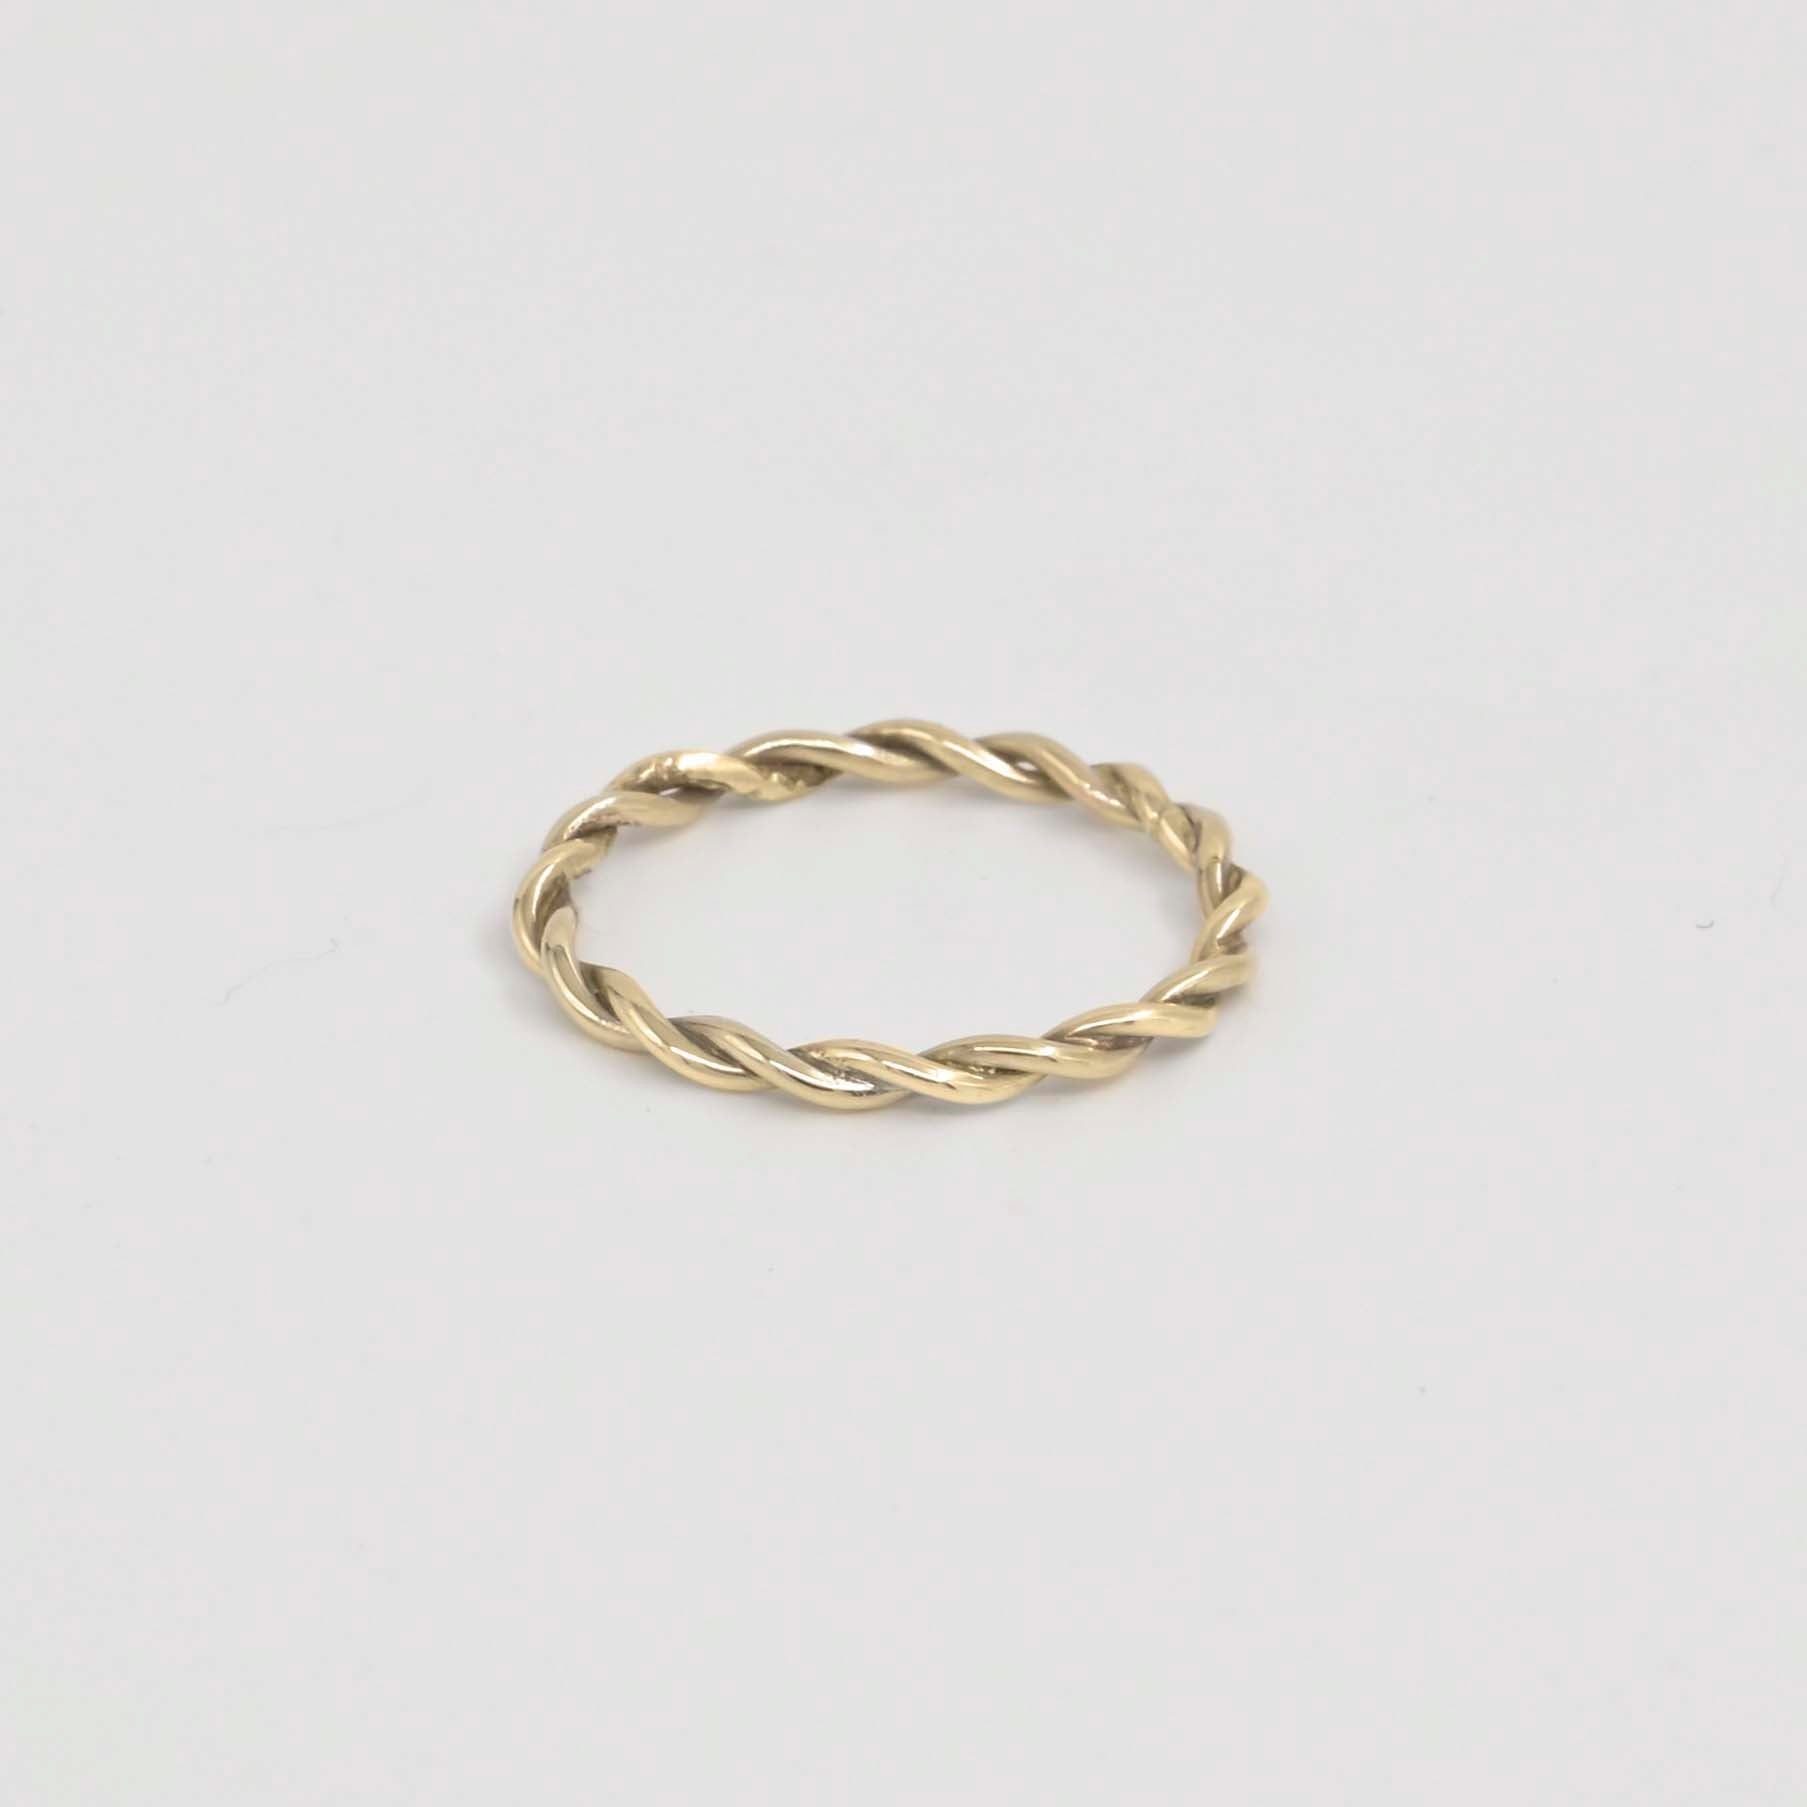 9ct-Yellow-Gold-Entwined-Wedding-Ring.jpg